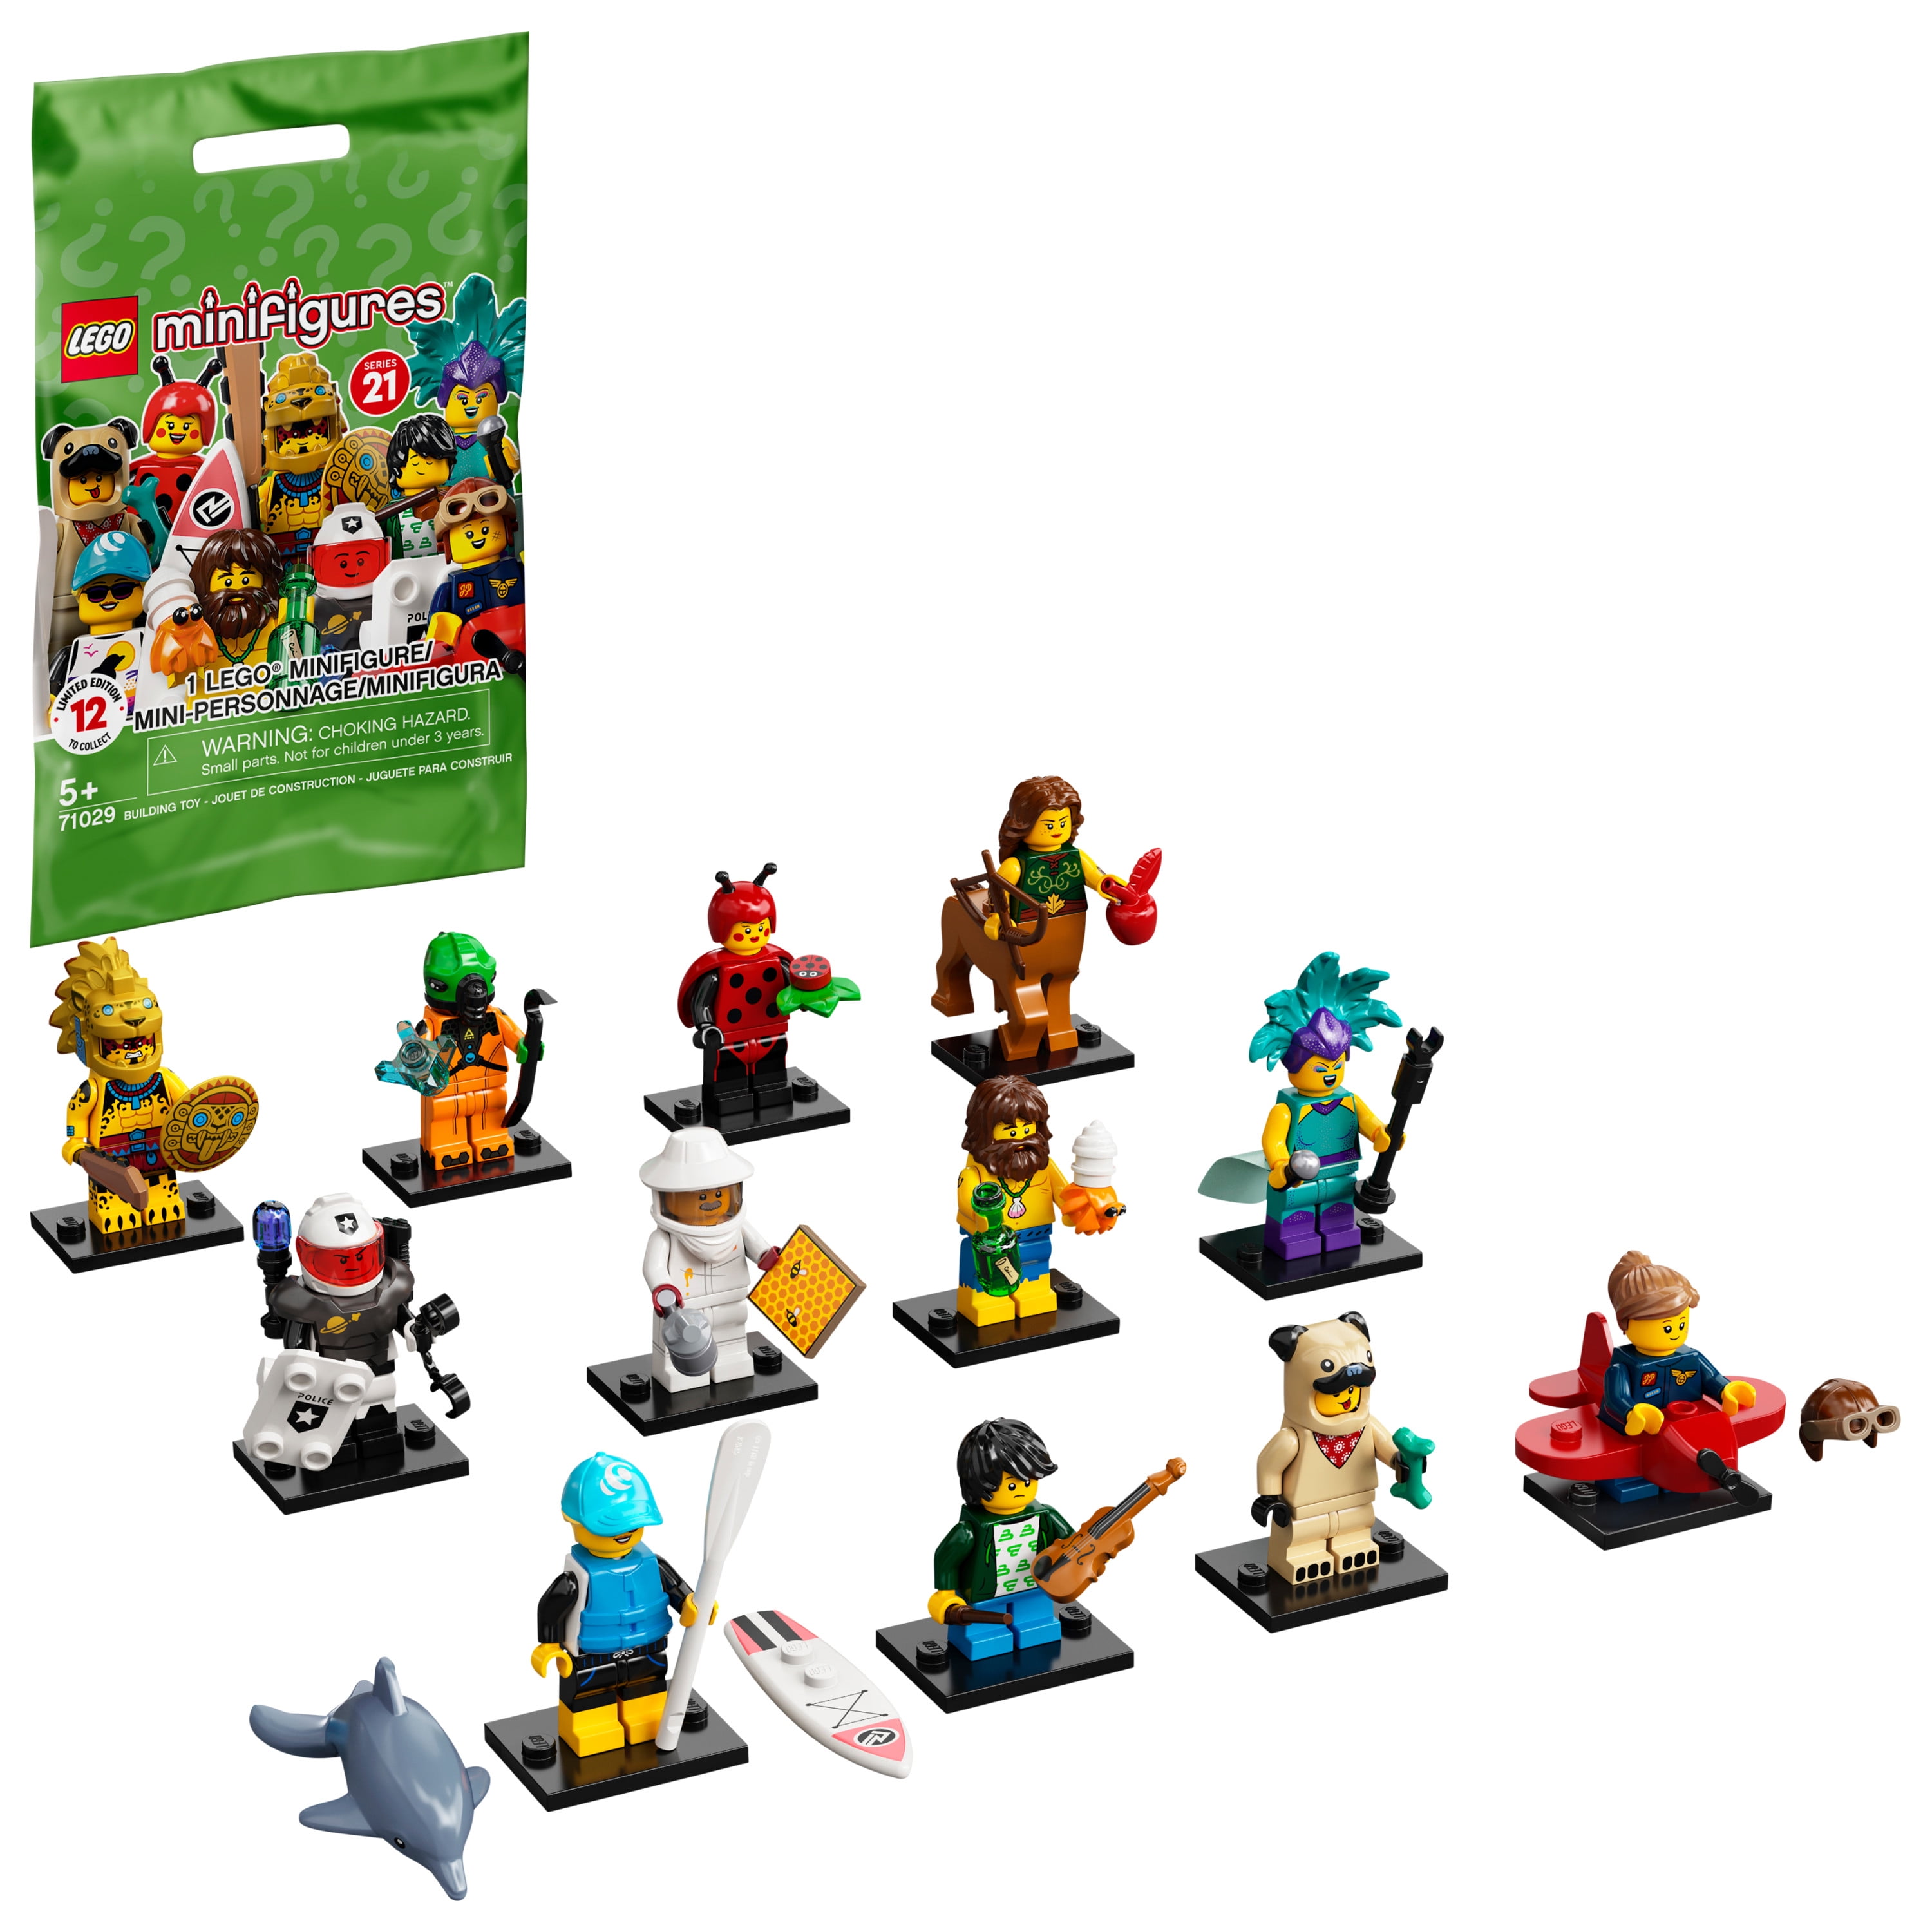 for sale online LEGO Minifigures Series 21 71029 Limited Edition Building Kit 1 of 12 to Collect